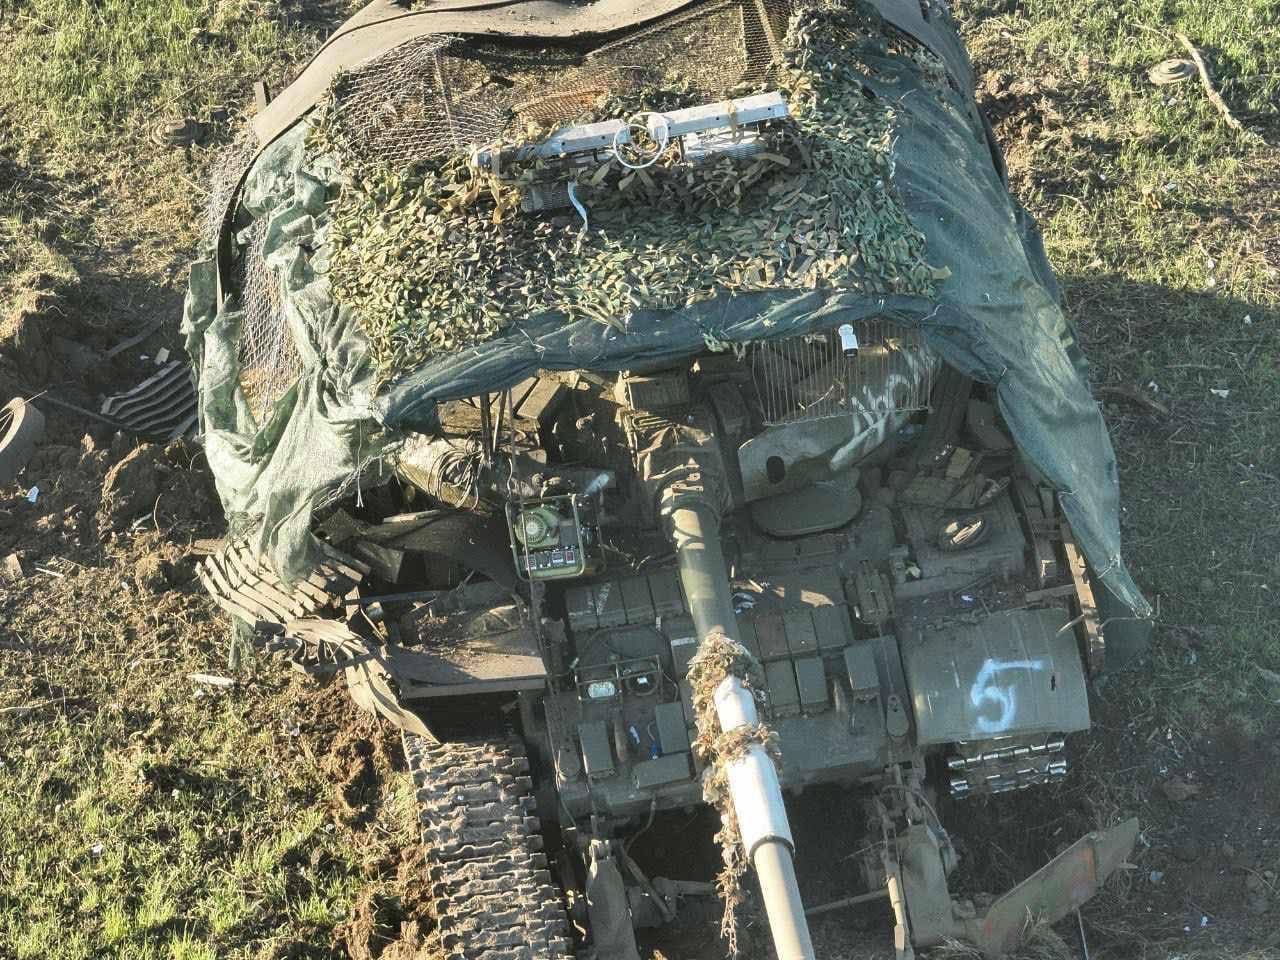 In spite of improvised armor and electronic countermeasures, Russian combat  vehicles continue to fall to Ukrainian FPV drones and mines